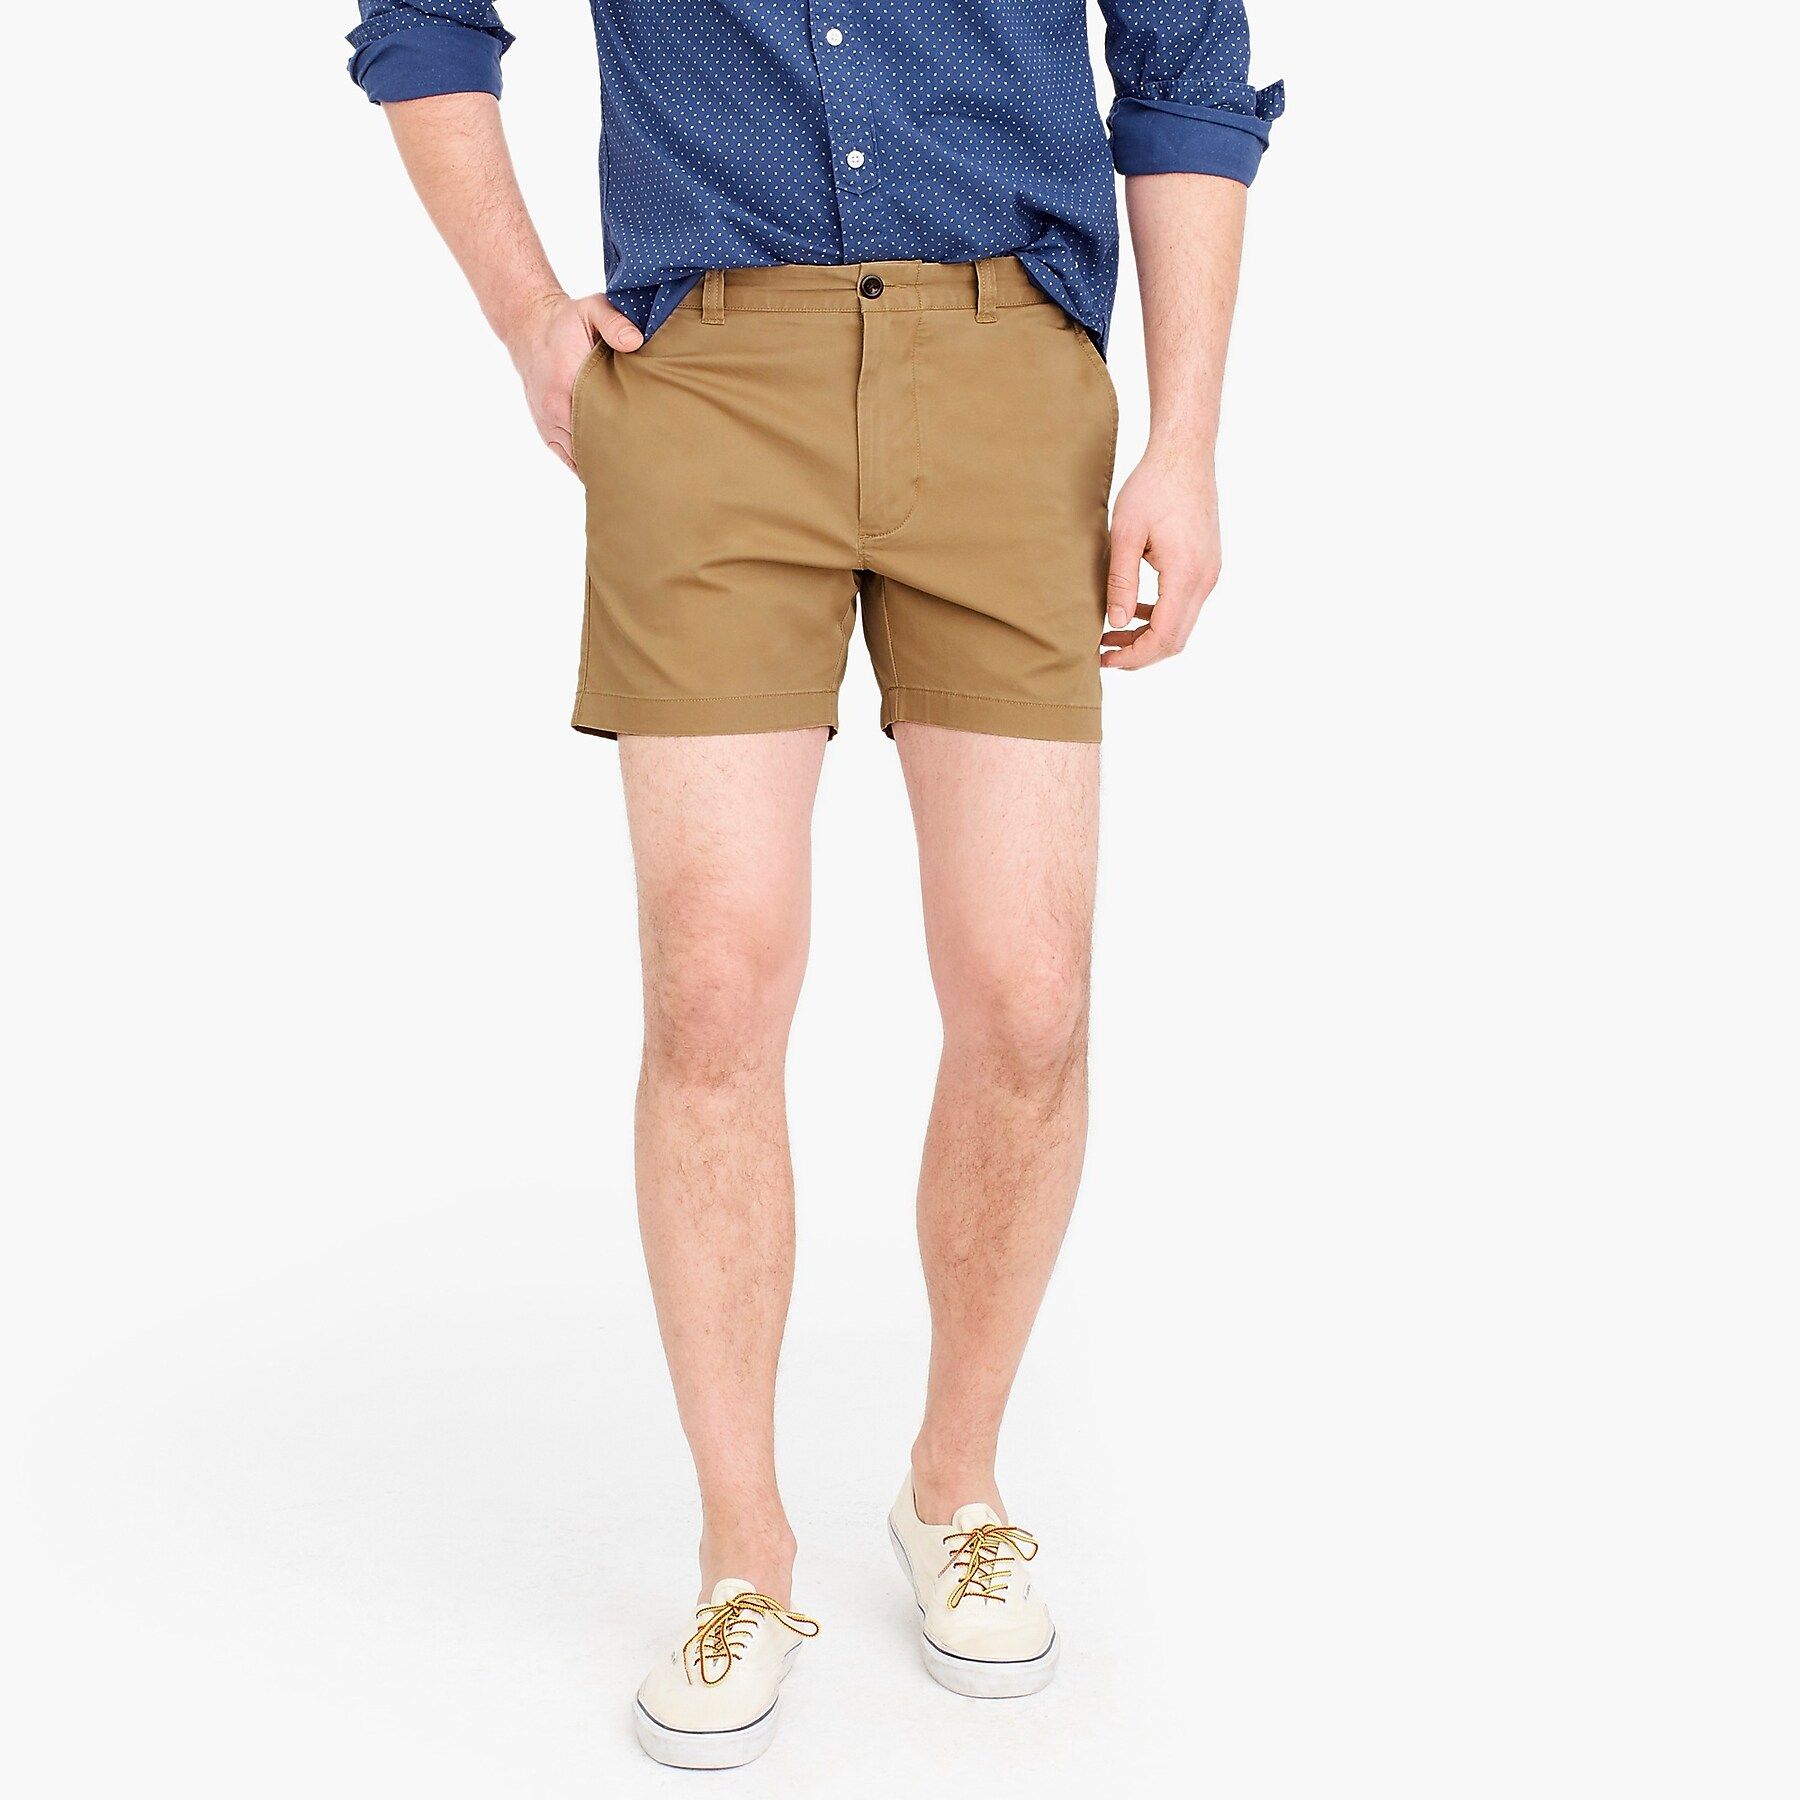 How To Style Stretch Shorts